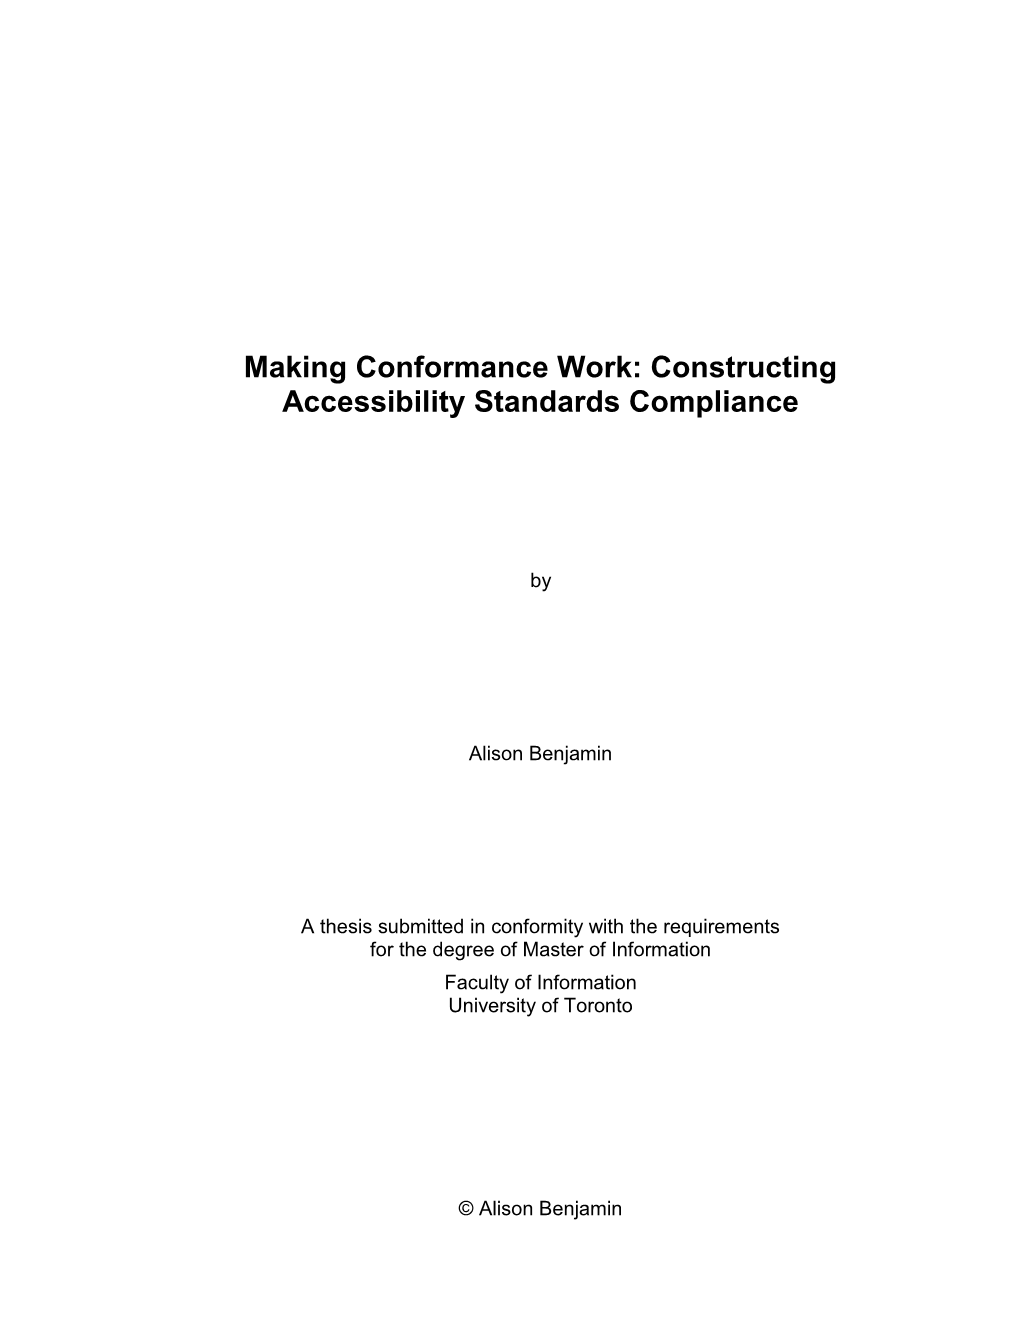 Making Conformance Work: Constructing Accessibility Standards Compliance